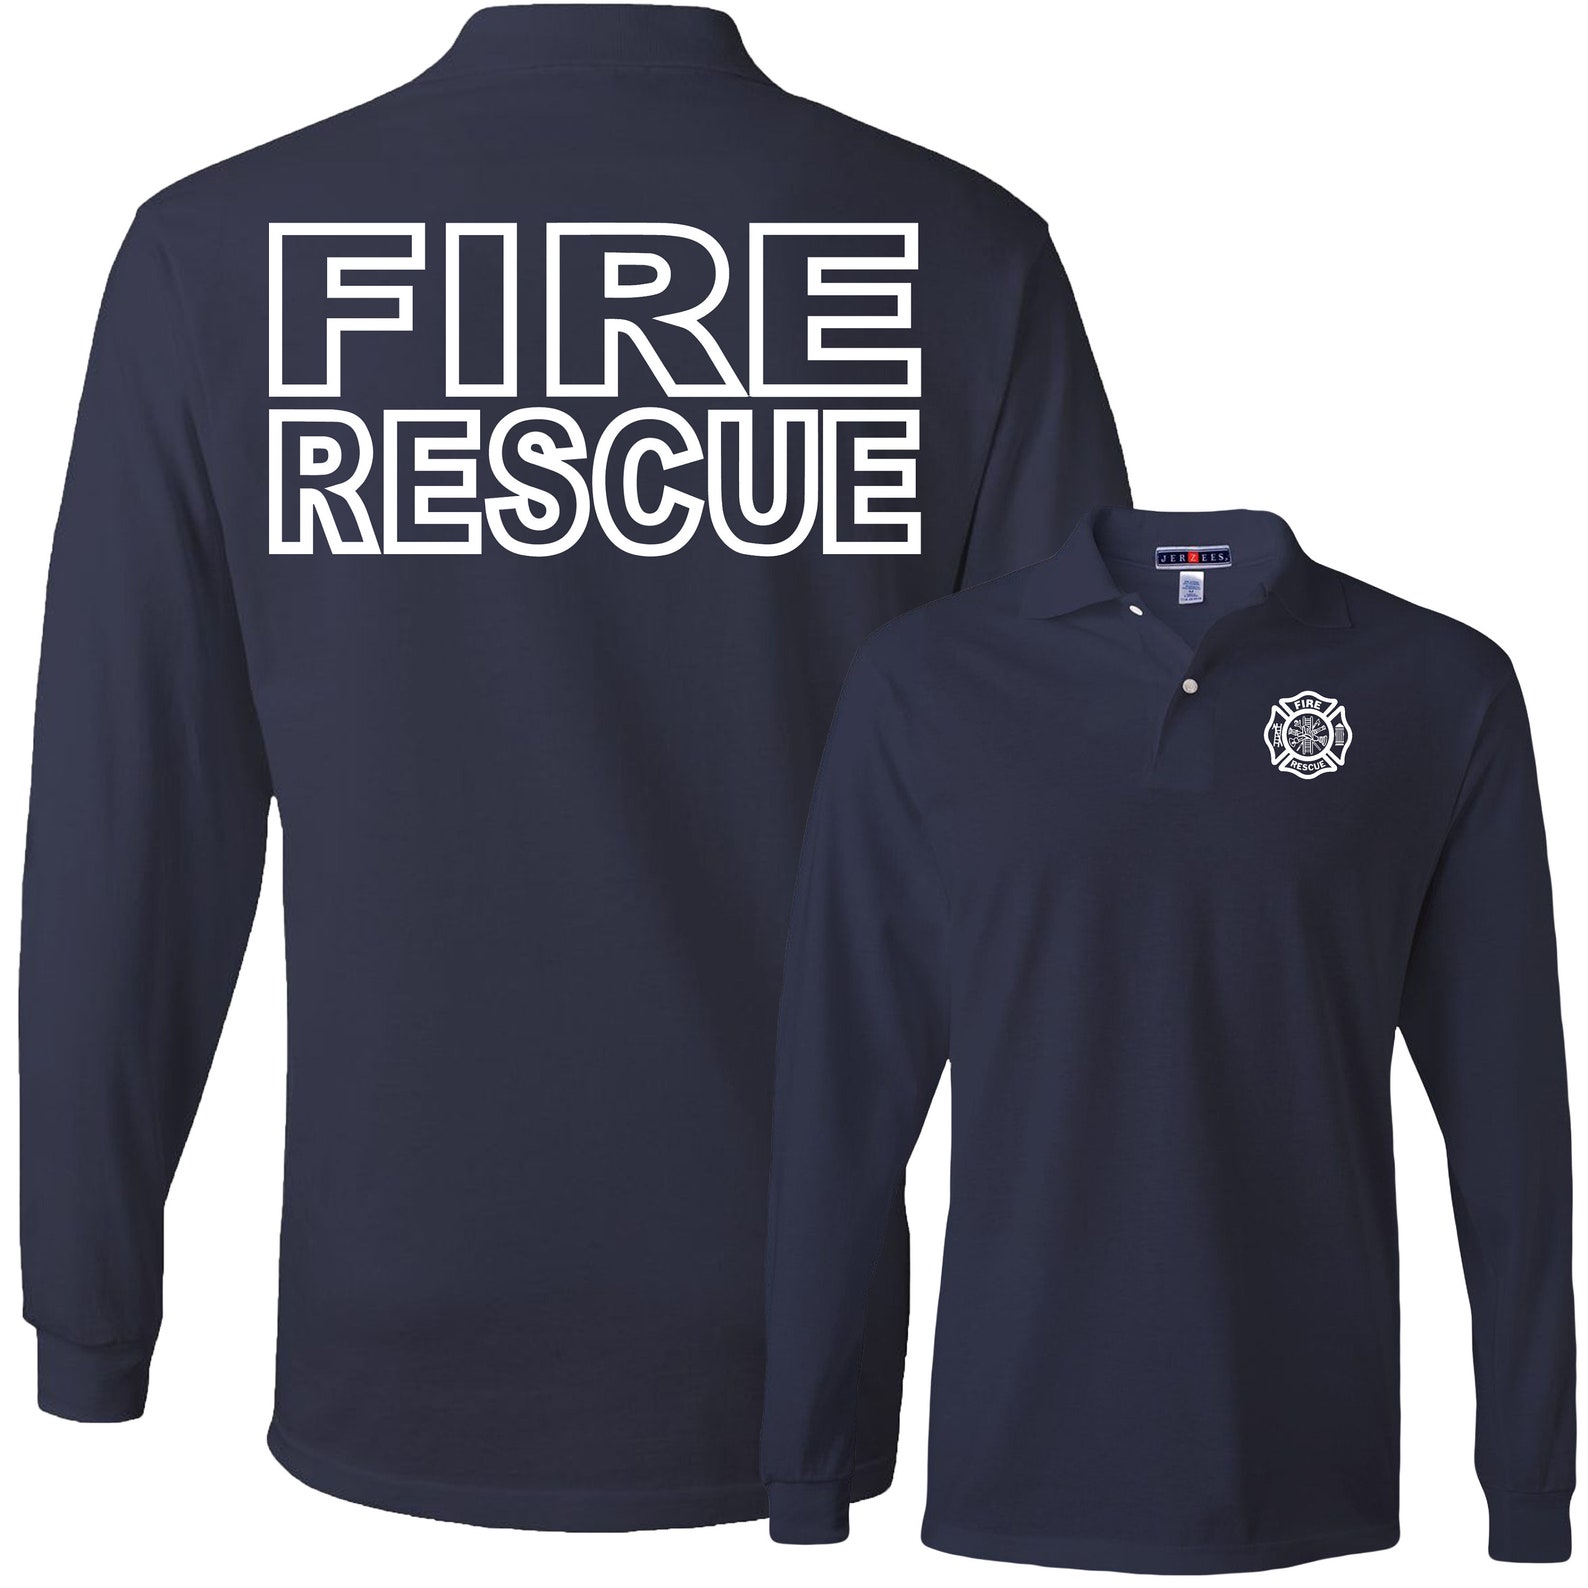 Fire Rescue Navy Polo Long Sleeve Men's Fire Department | Etsy